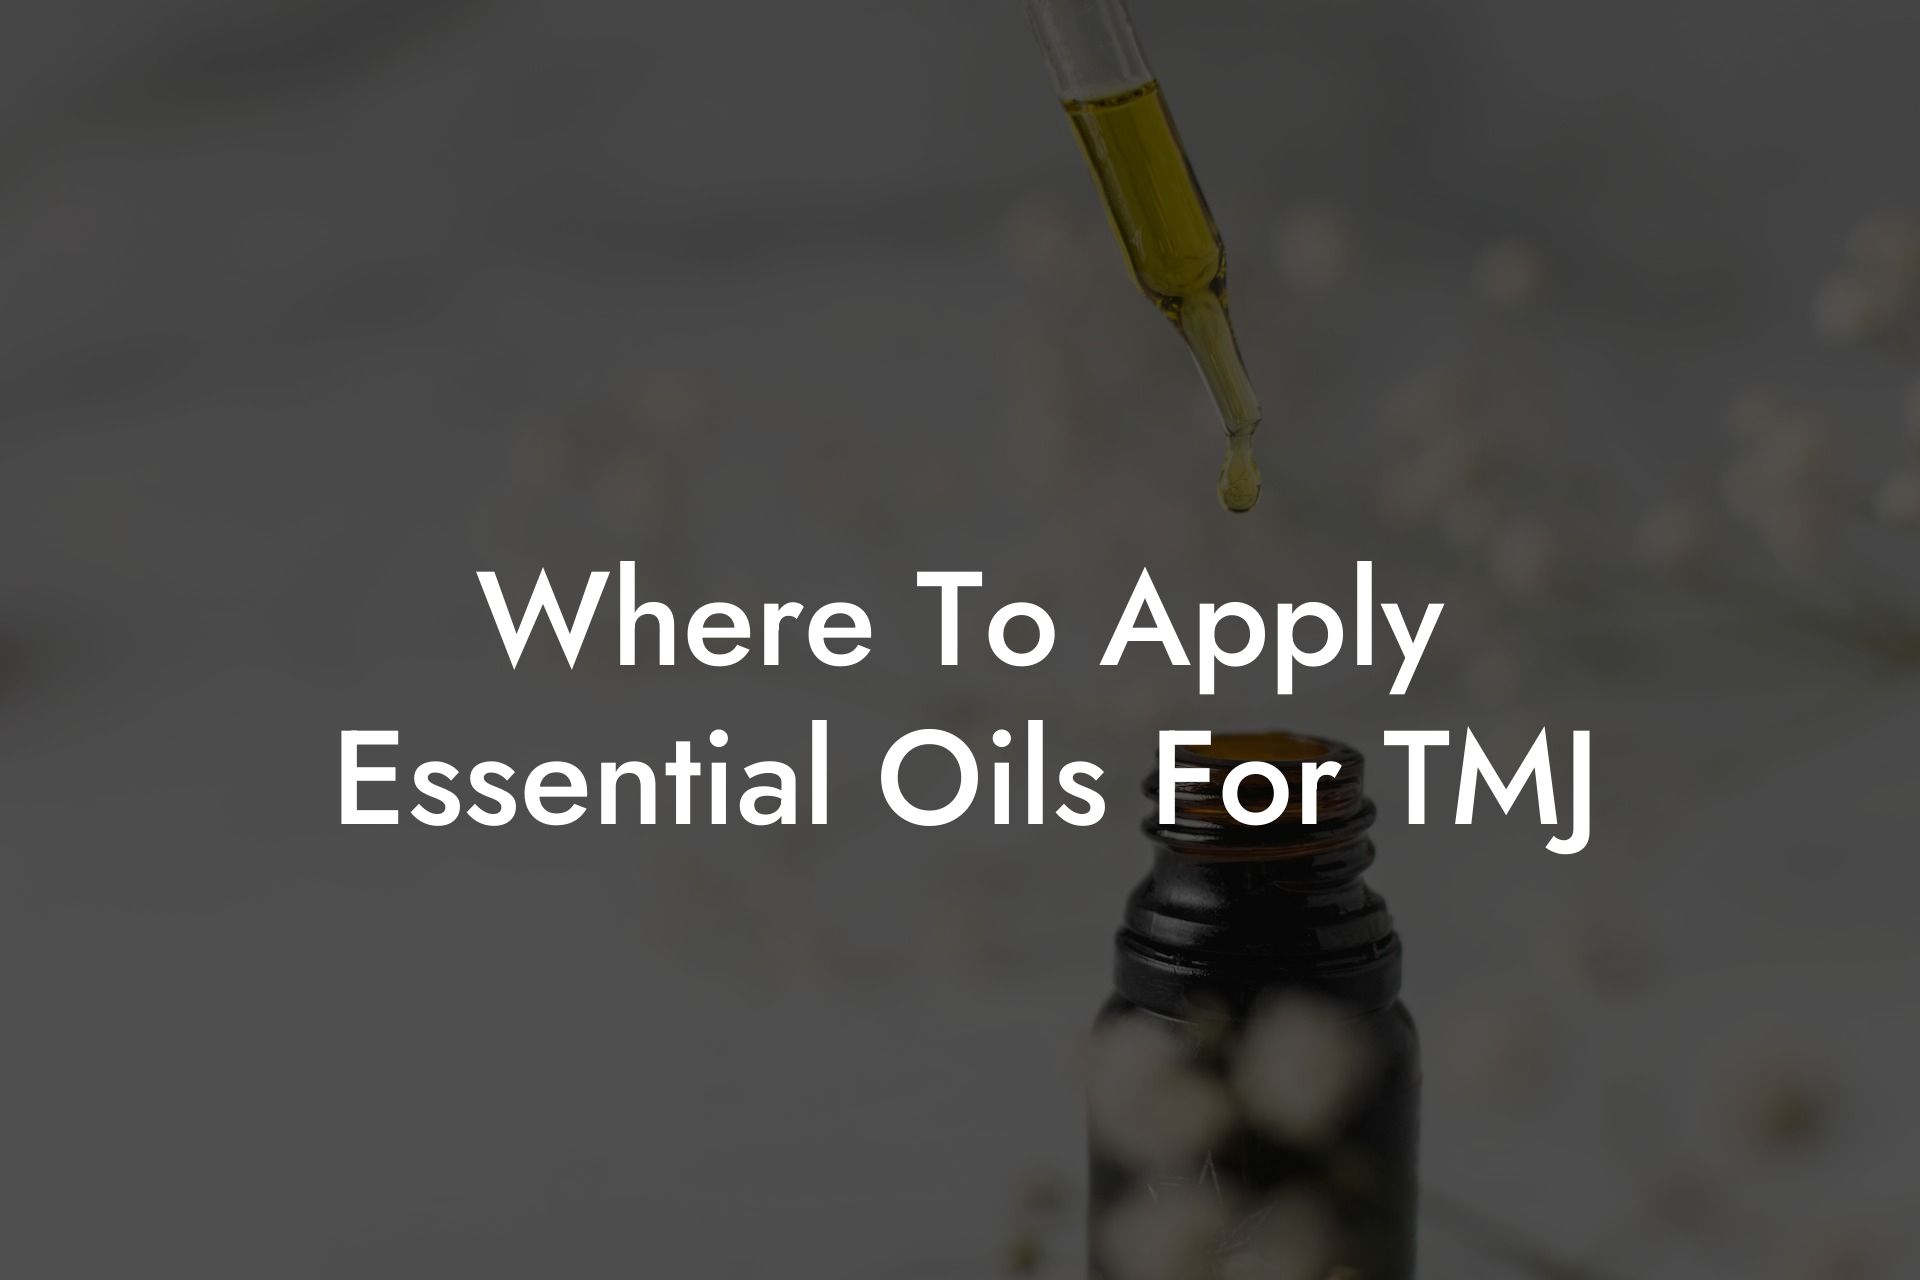 Where To Apply Essential Oils For TMJ